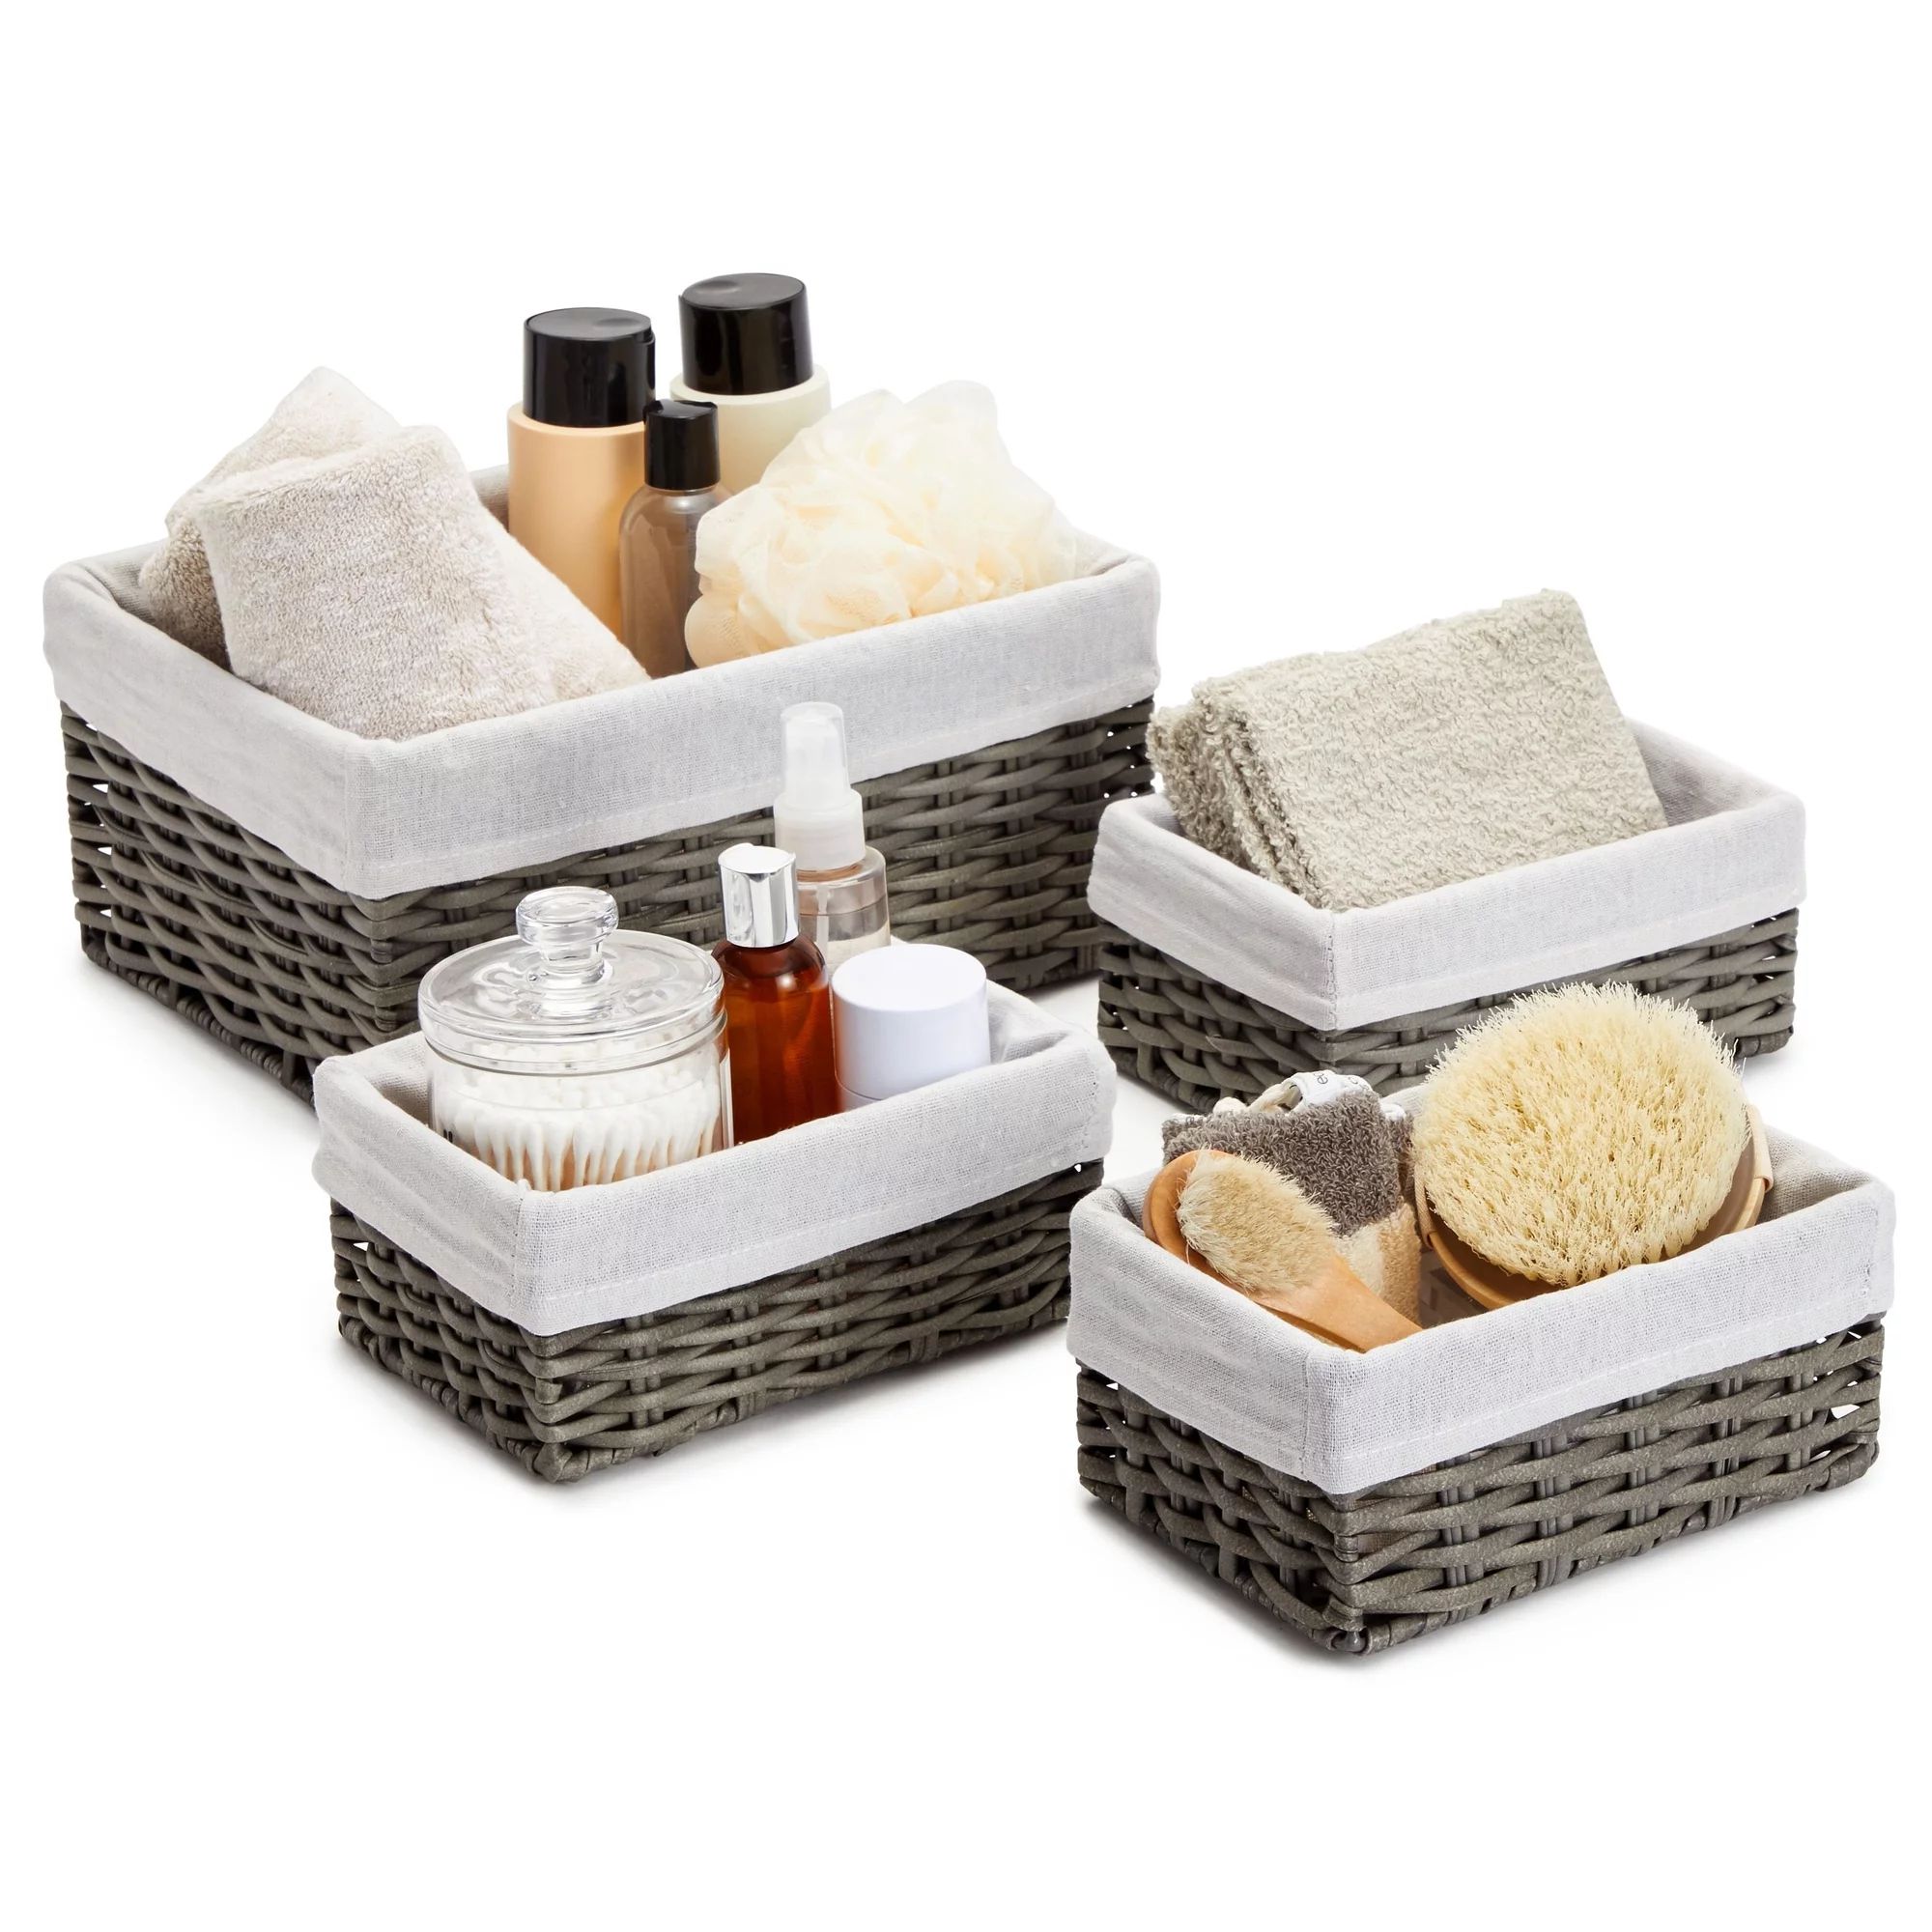 4 Pack Rectangular Wicker Storage Baskets with Liners - Small Decorative Bins for Organizing Shel... | Walmart (US)